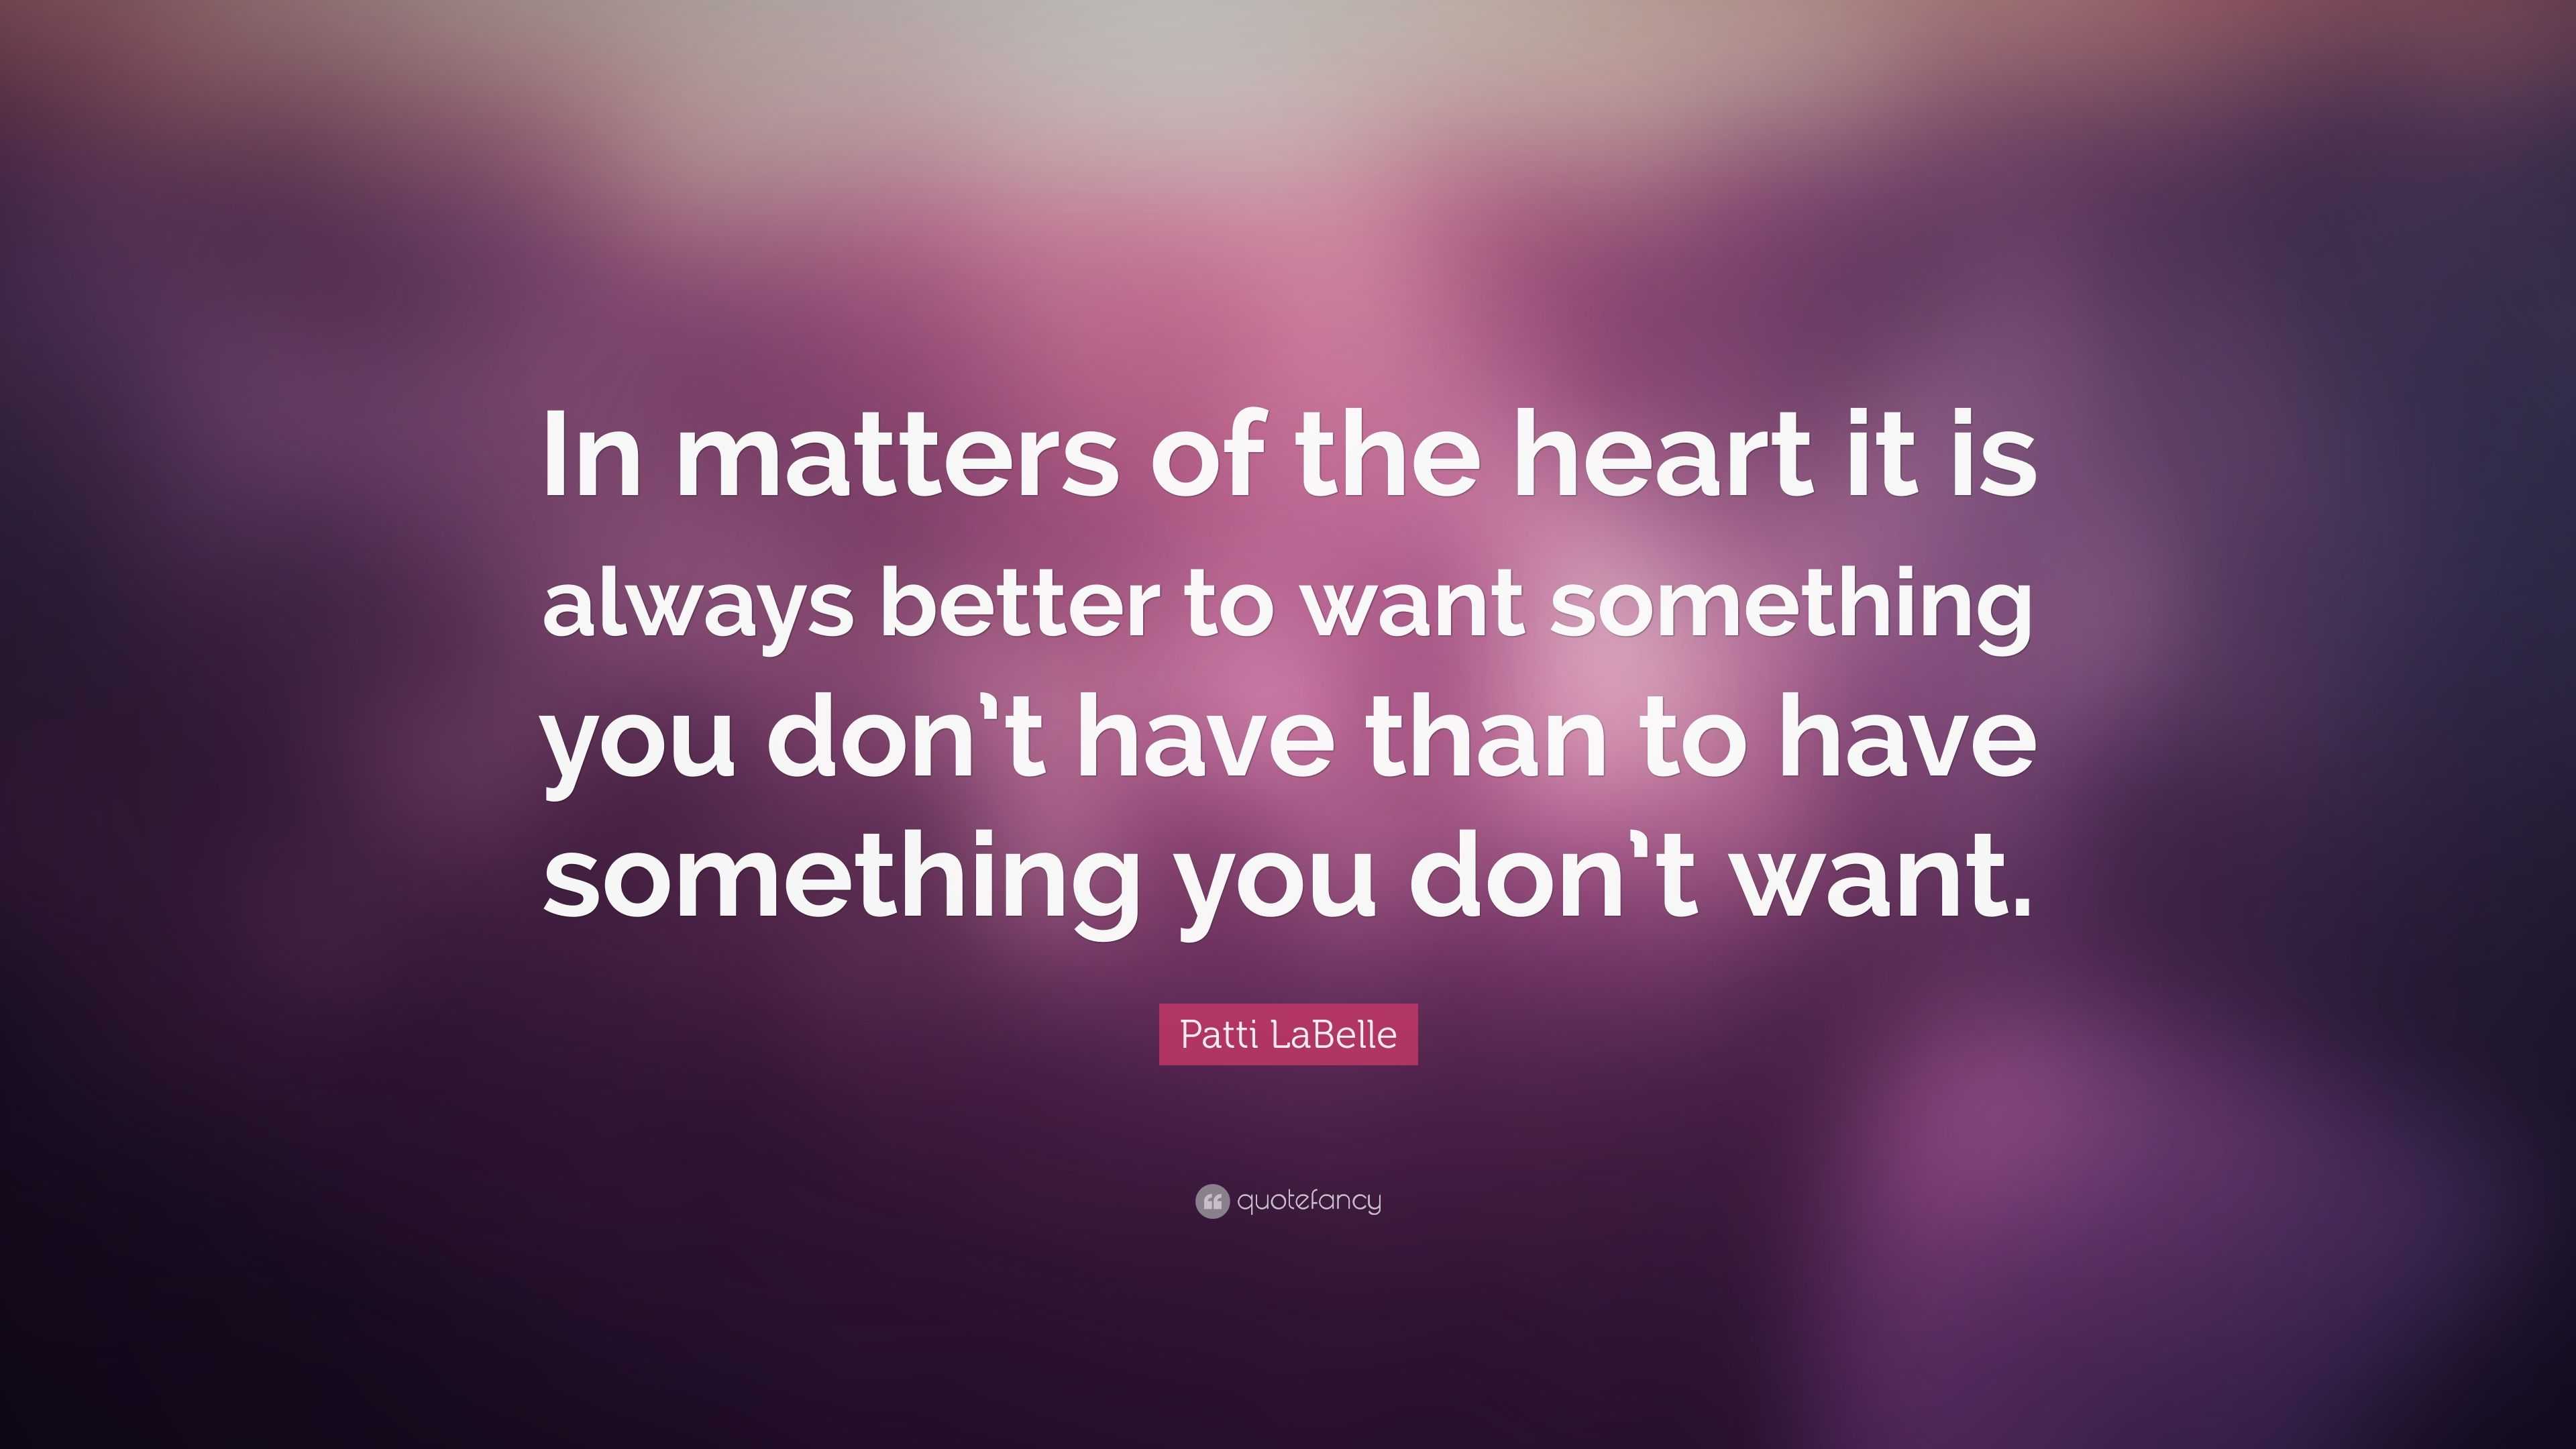 Patti LaBelle Quote: “In matters of the heart it is always better to ...